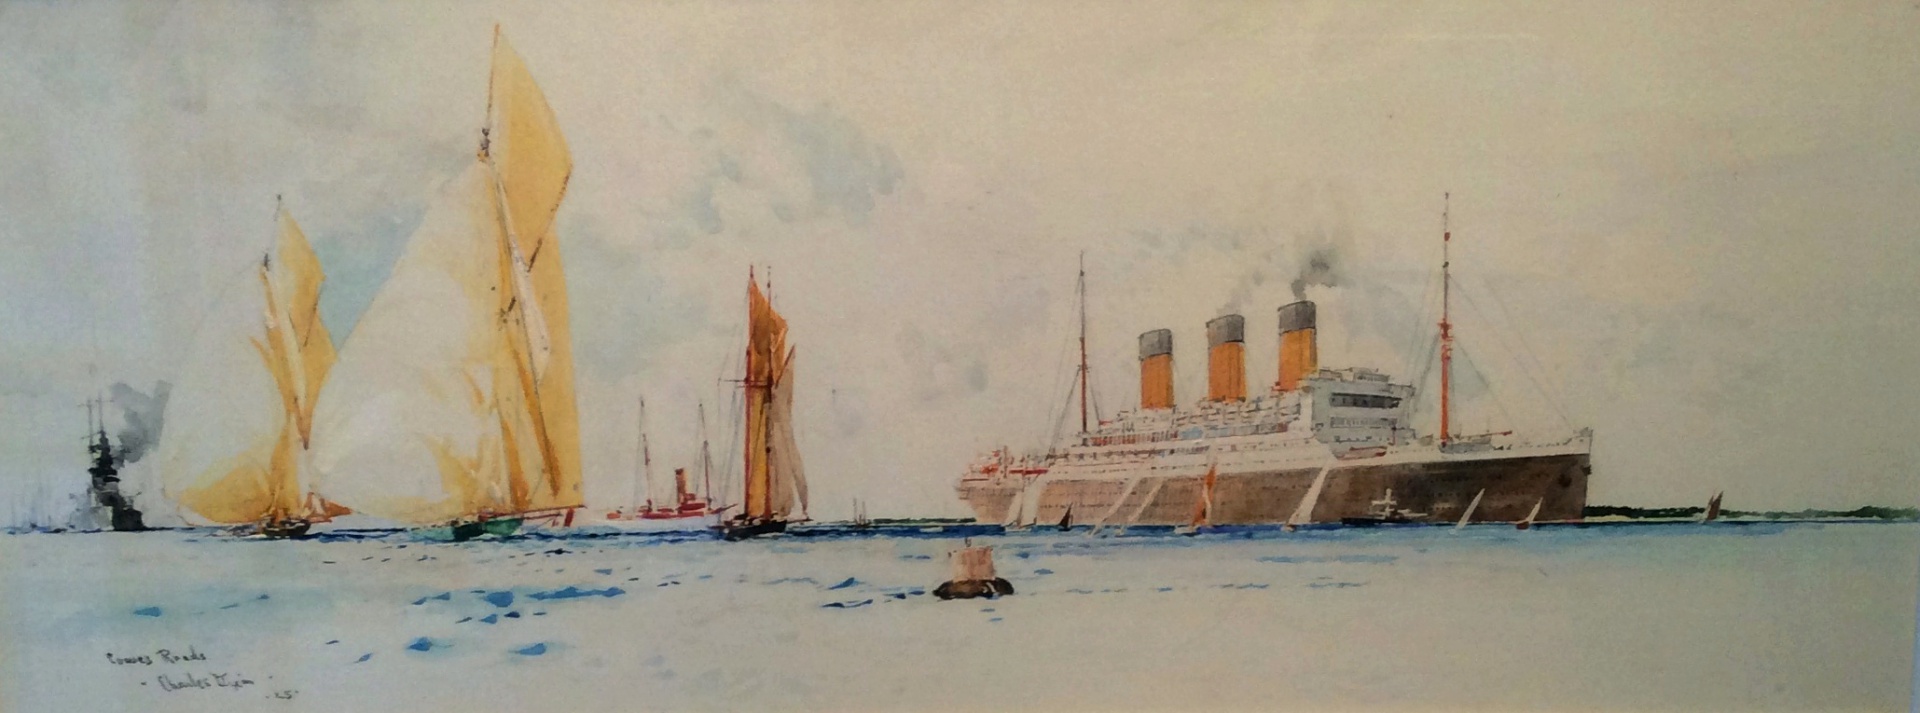 Cowes Roads - RMS BERENGARIA  amidst J class sailing cutters